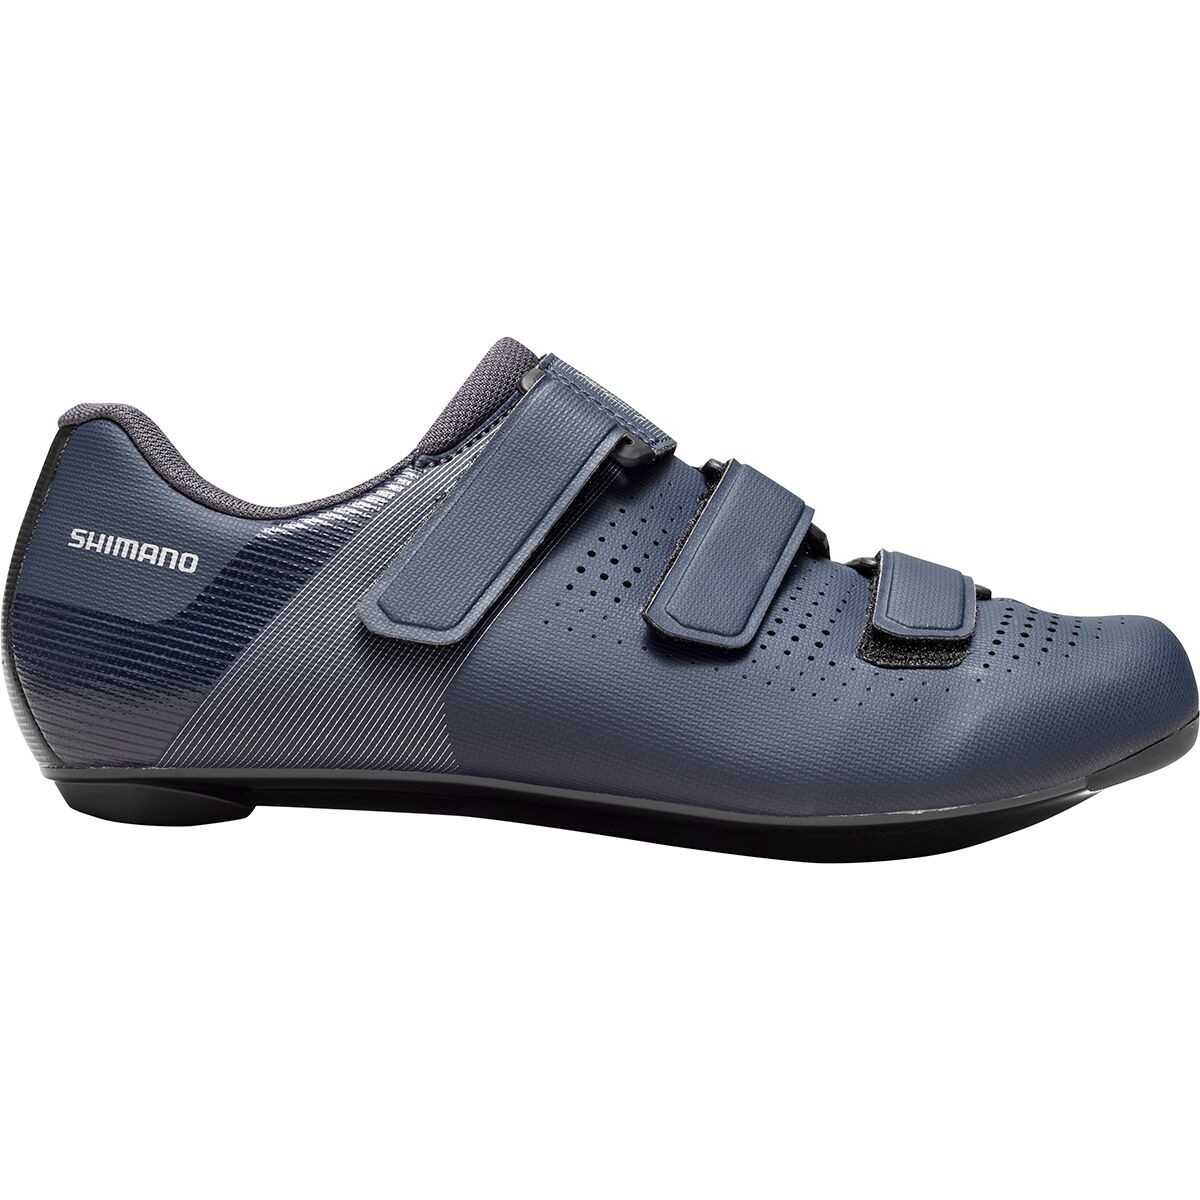 Shimano RC1 Limited Edition Cycling Shoe - Men's